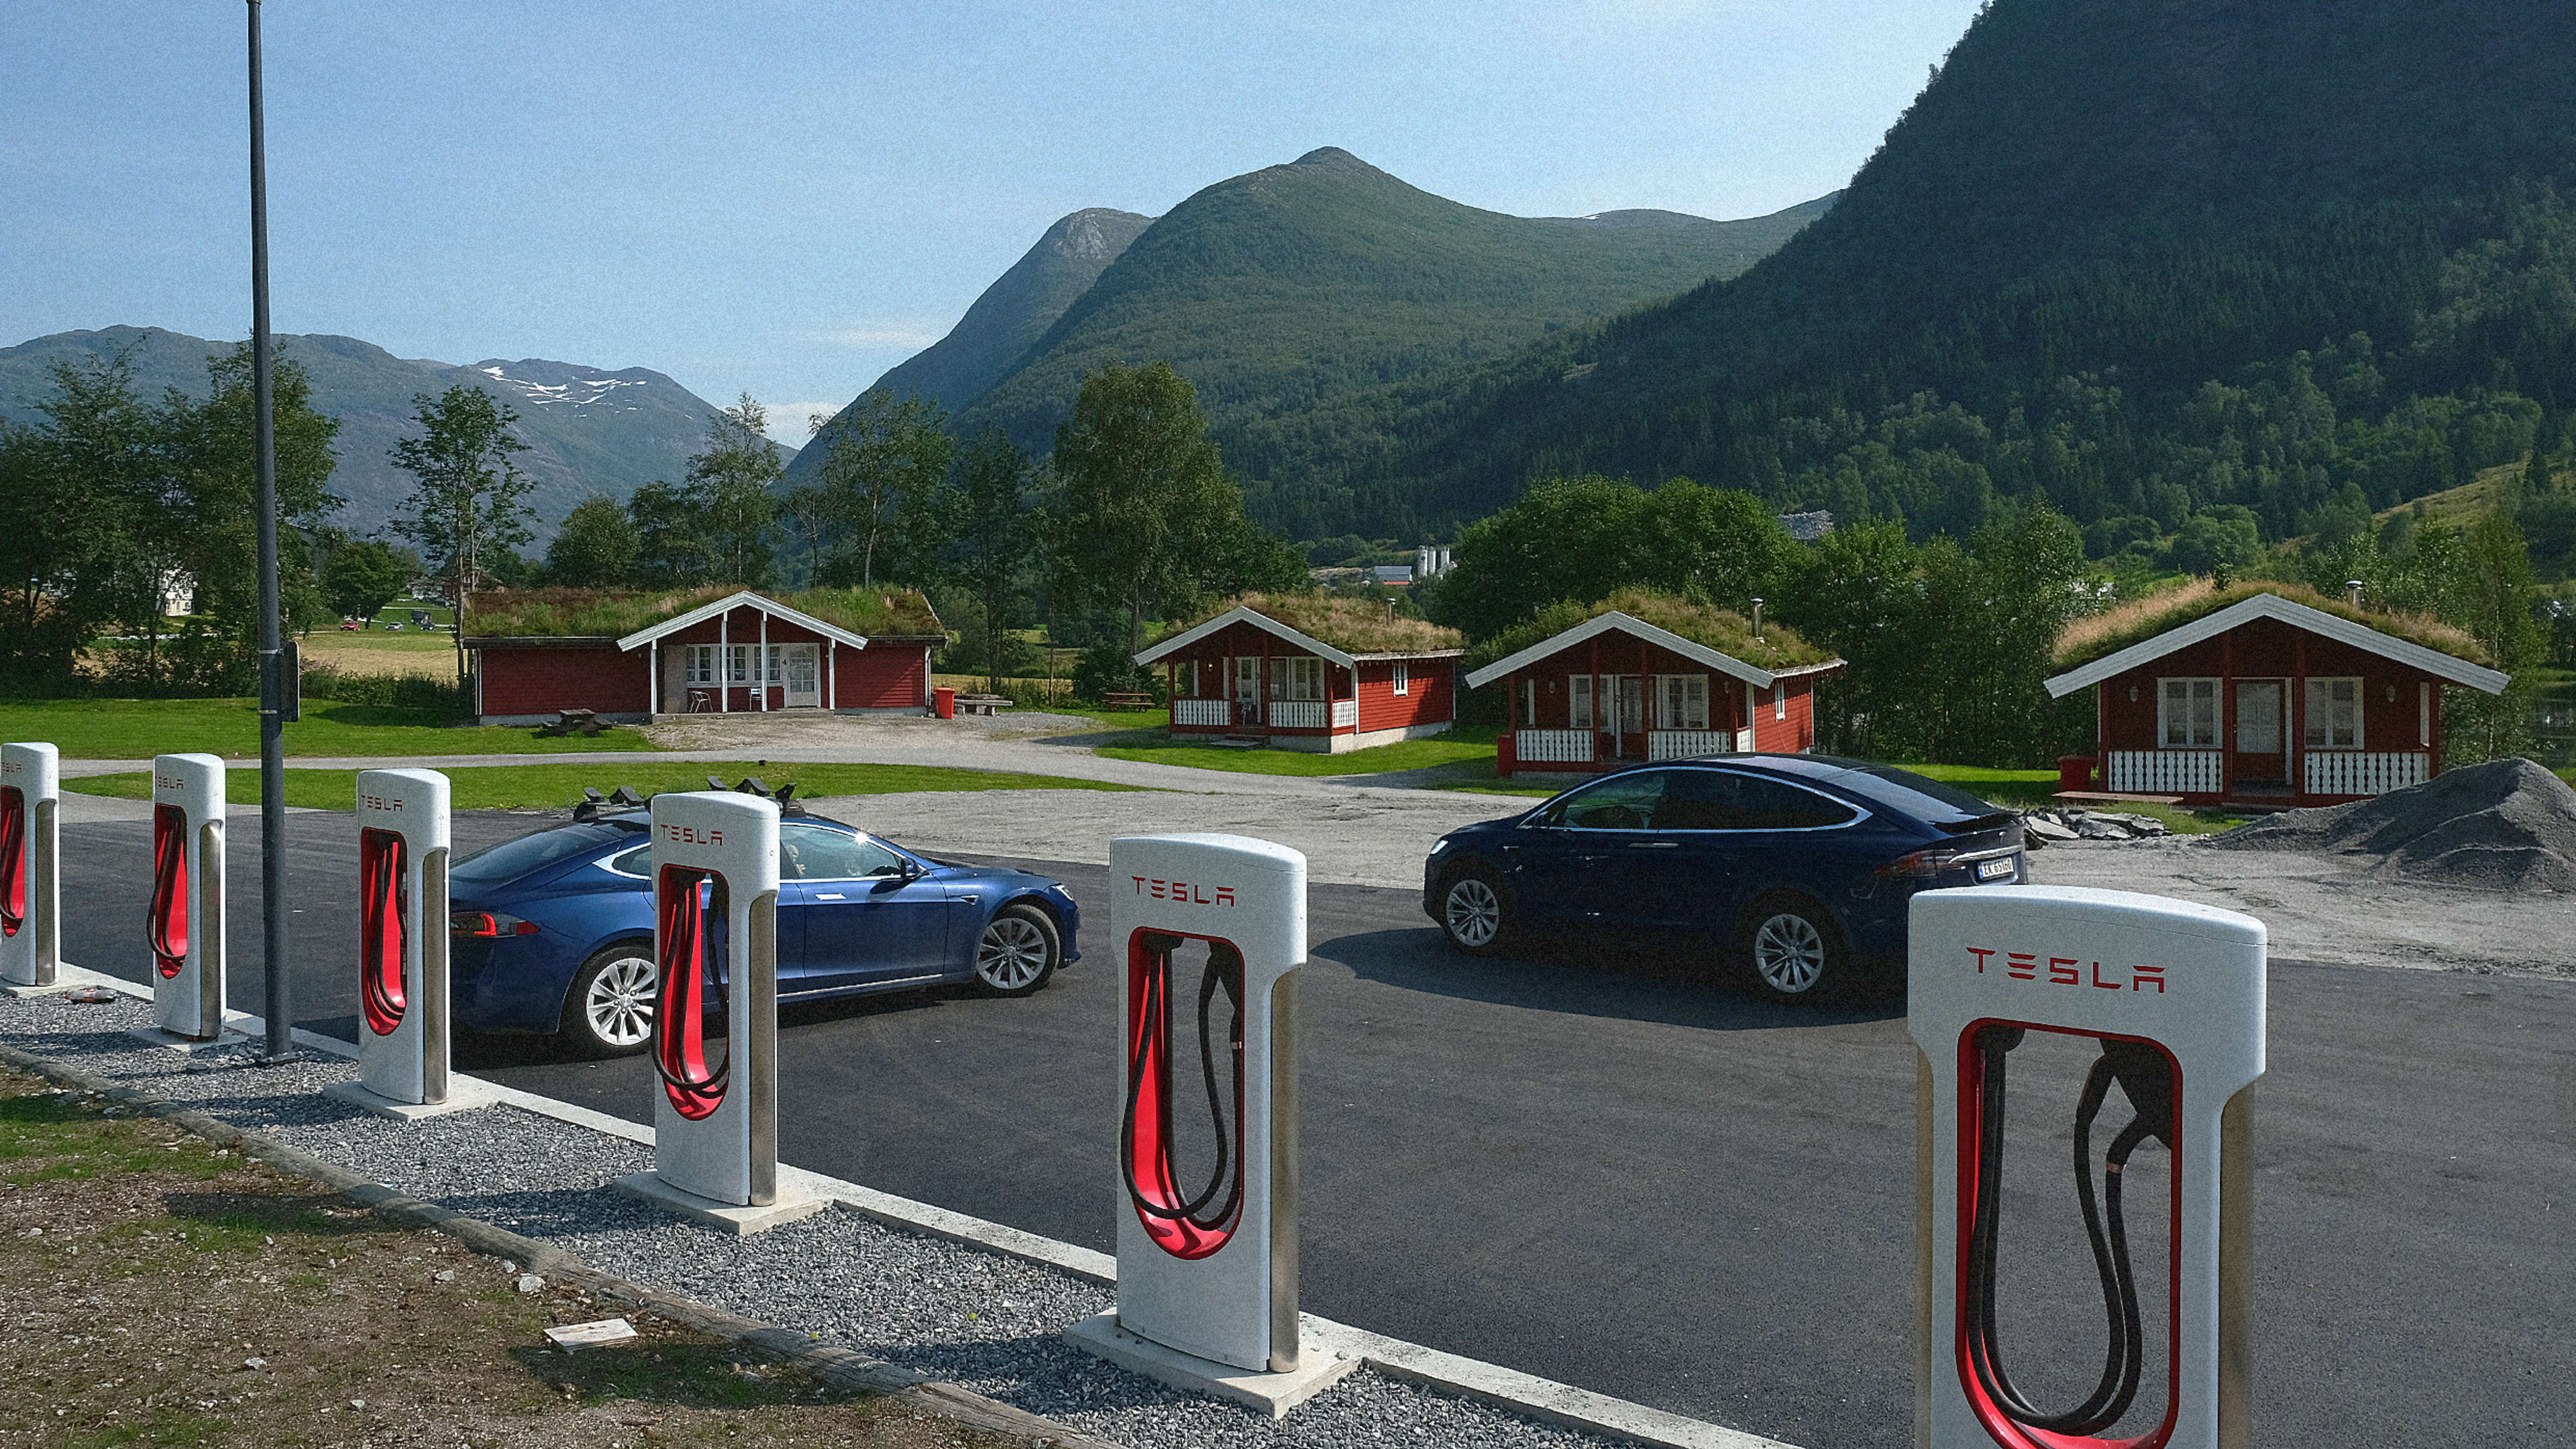 Norway has the most EVs per capita, and the most chargers per EV. Here’s how they did it